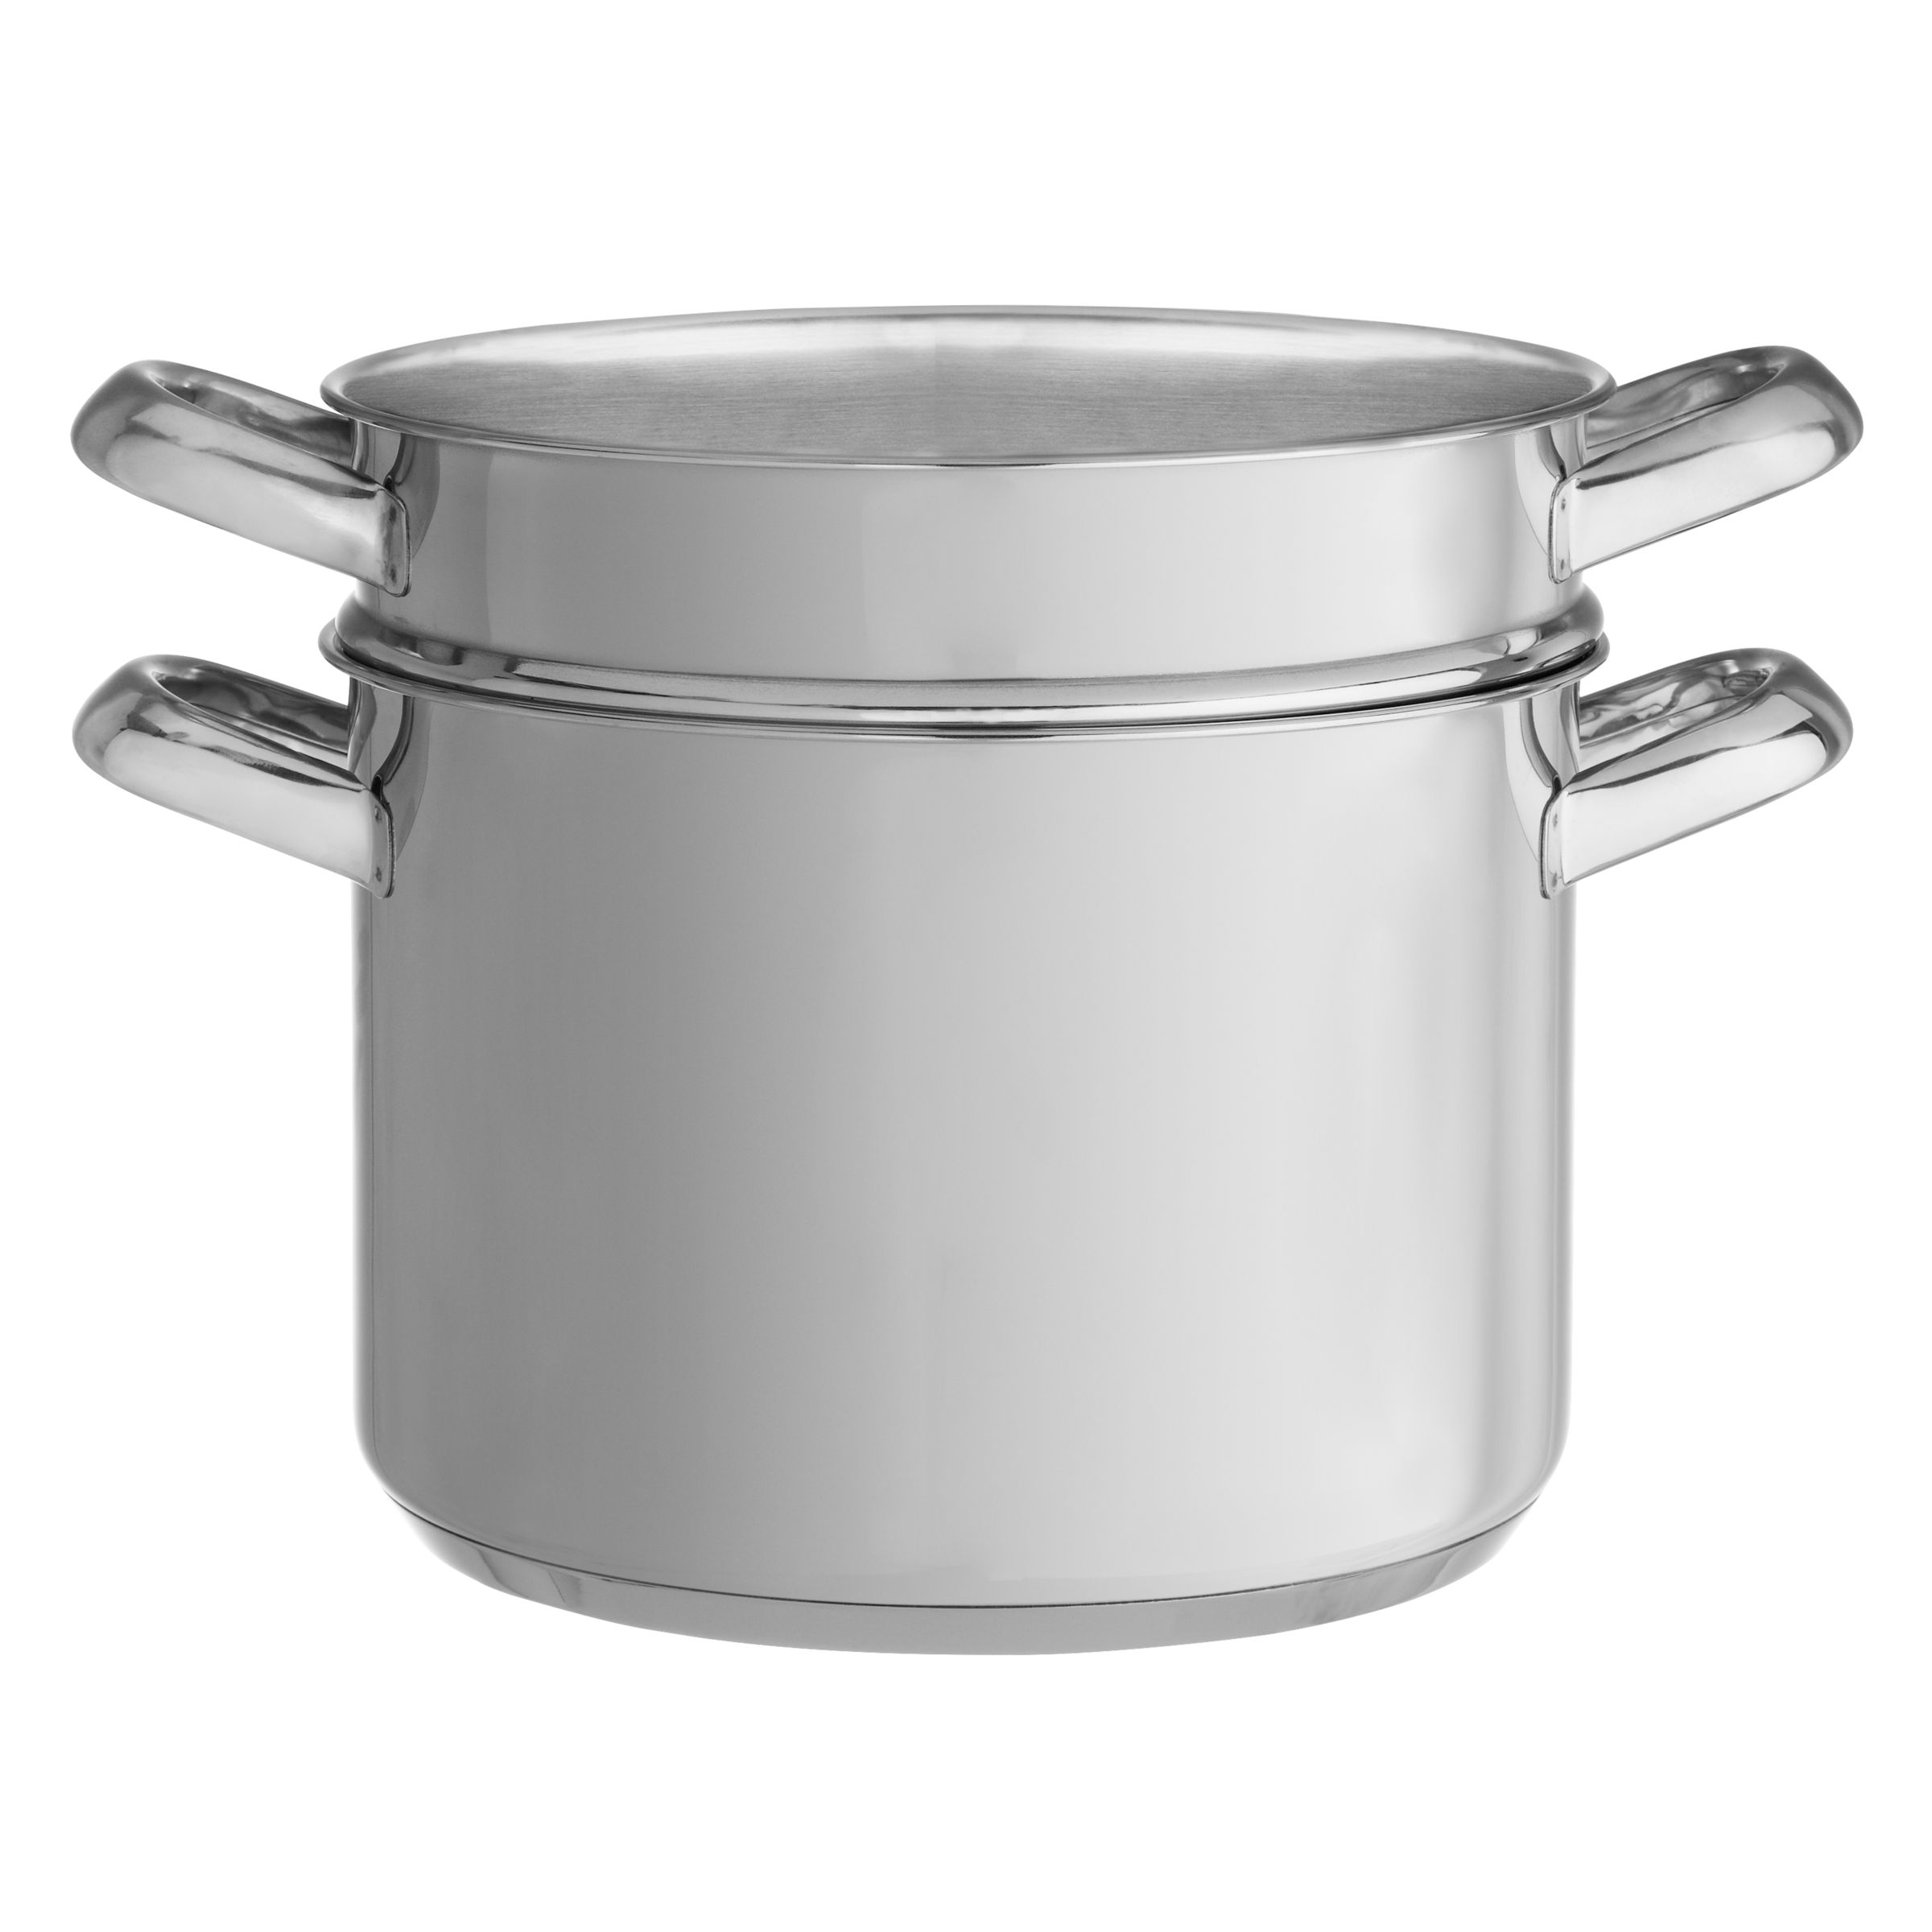 John Lewis Speciality Stainless Steel Pasta Pot